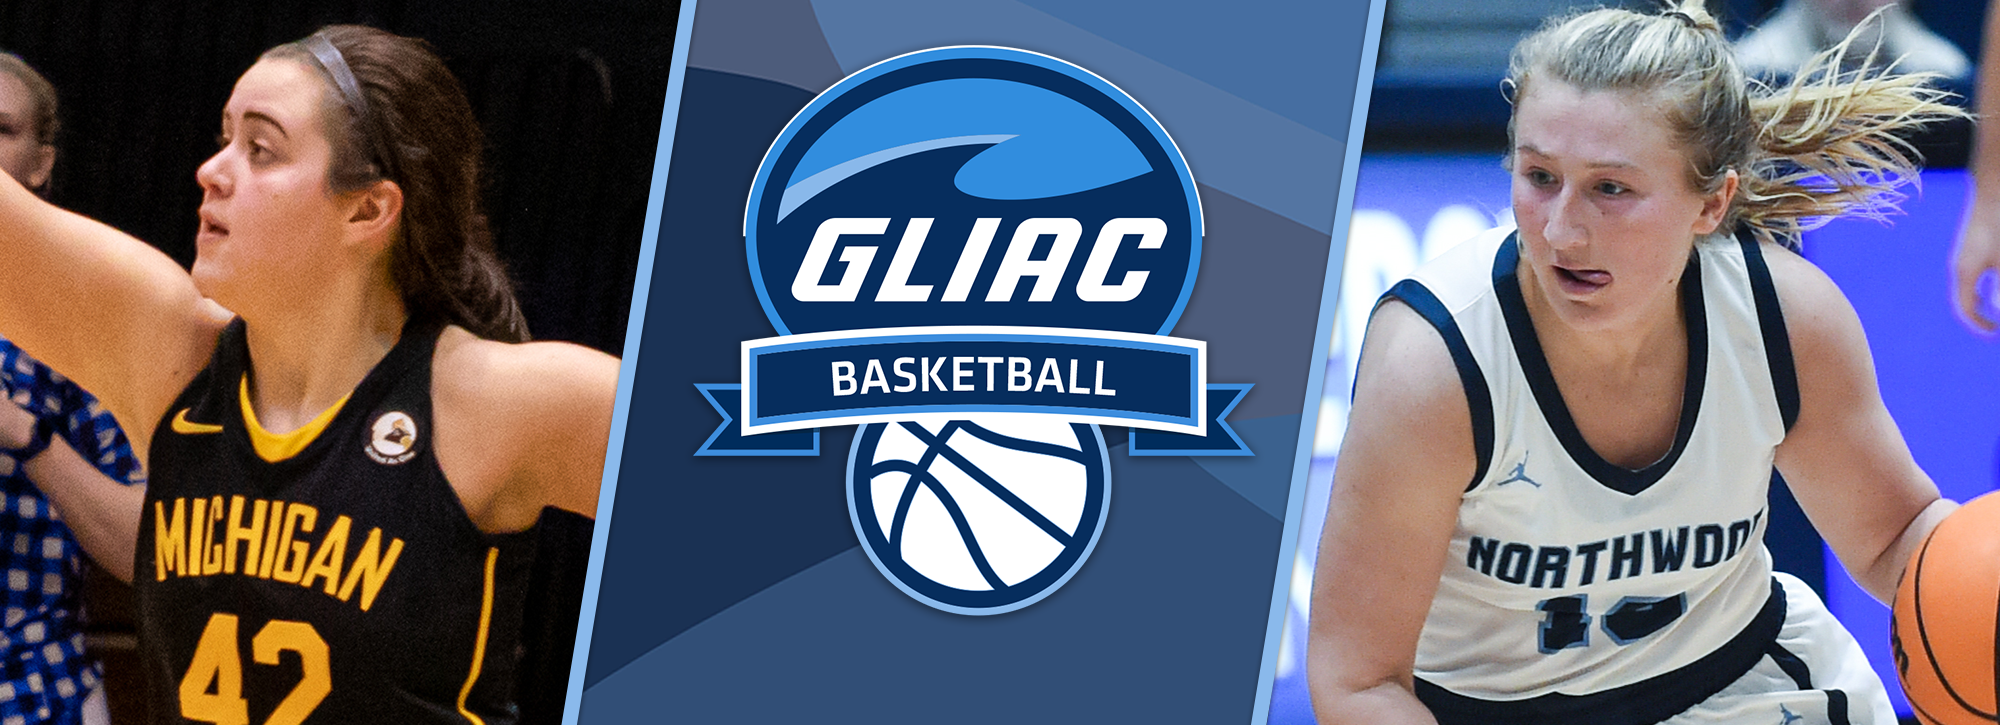 Tech's Dax and NU's Taylor named GLIAC Women's Basketball Players of the Week